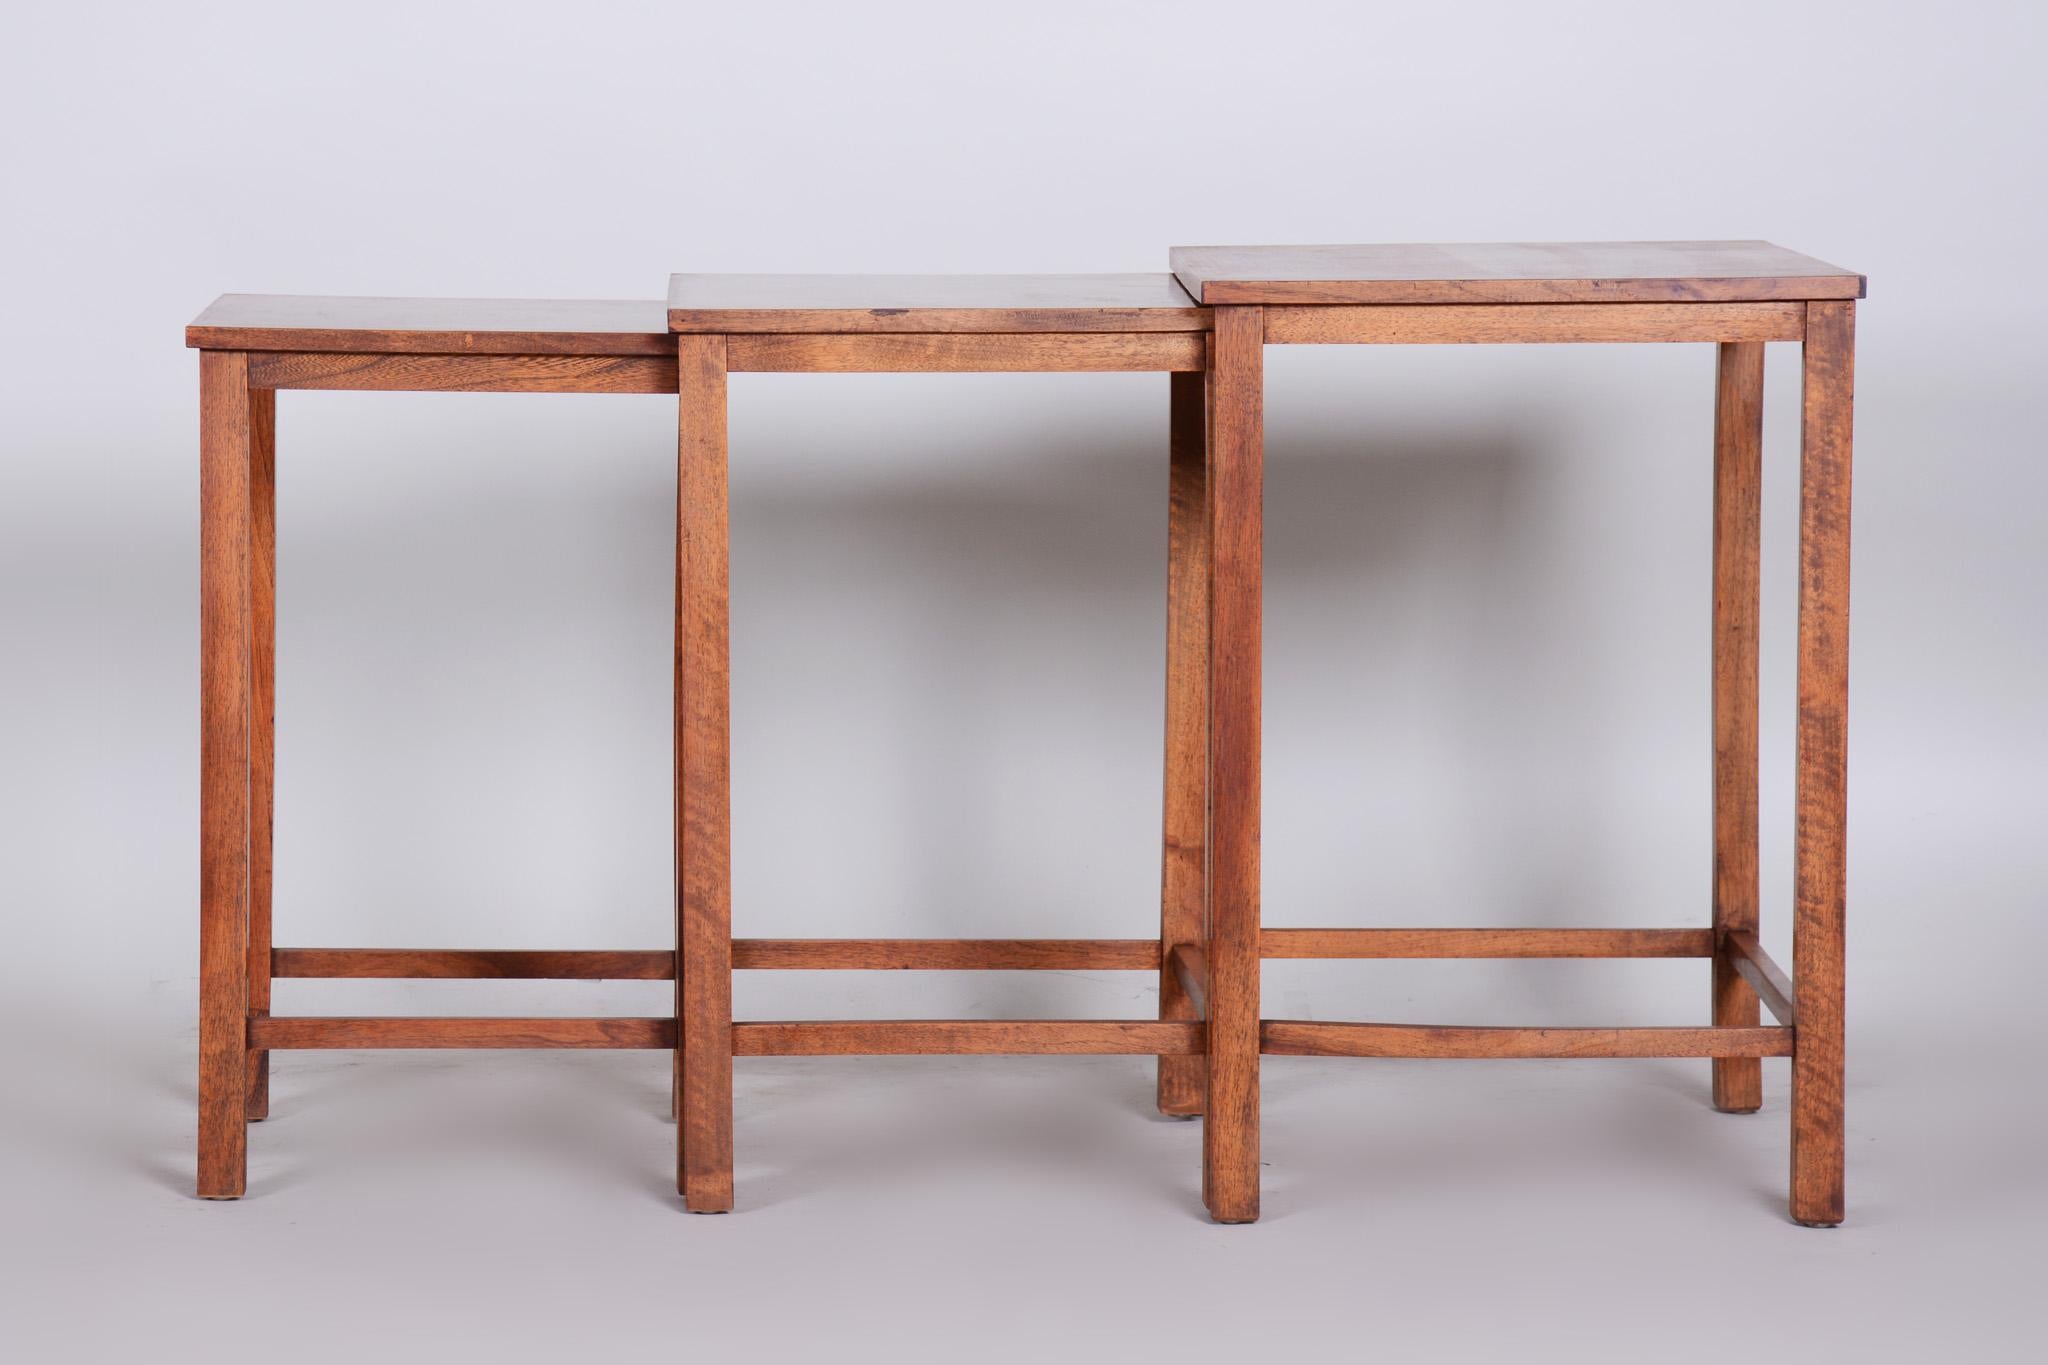 Original Condition Brown Nest Tables Made in the 1930s, Czech For Sale 2